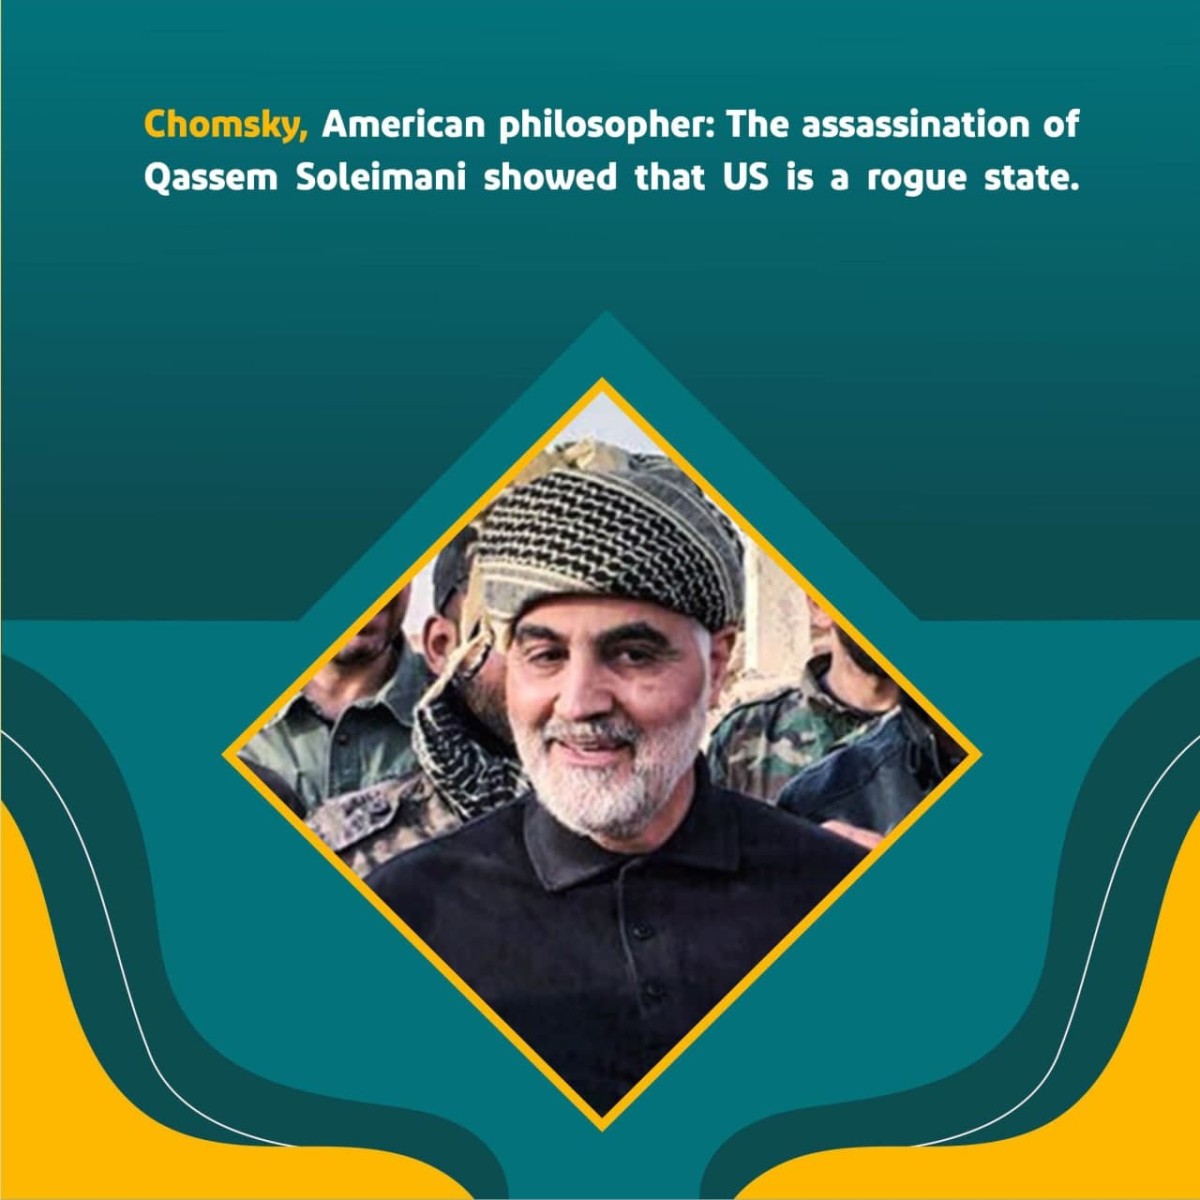  Chomsky, American Philosopher: The assassination of Qassem Soleimani showed that US is a rogue state.